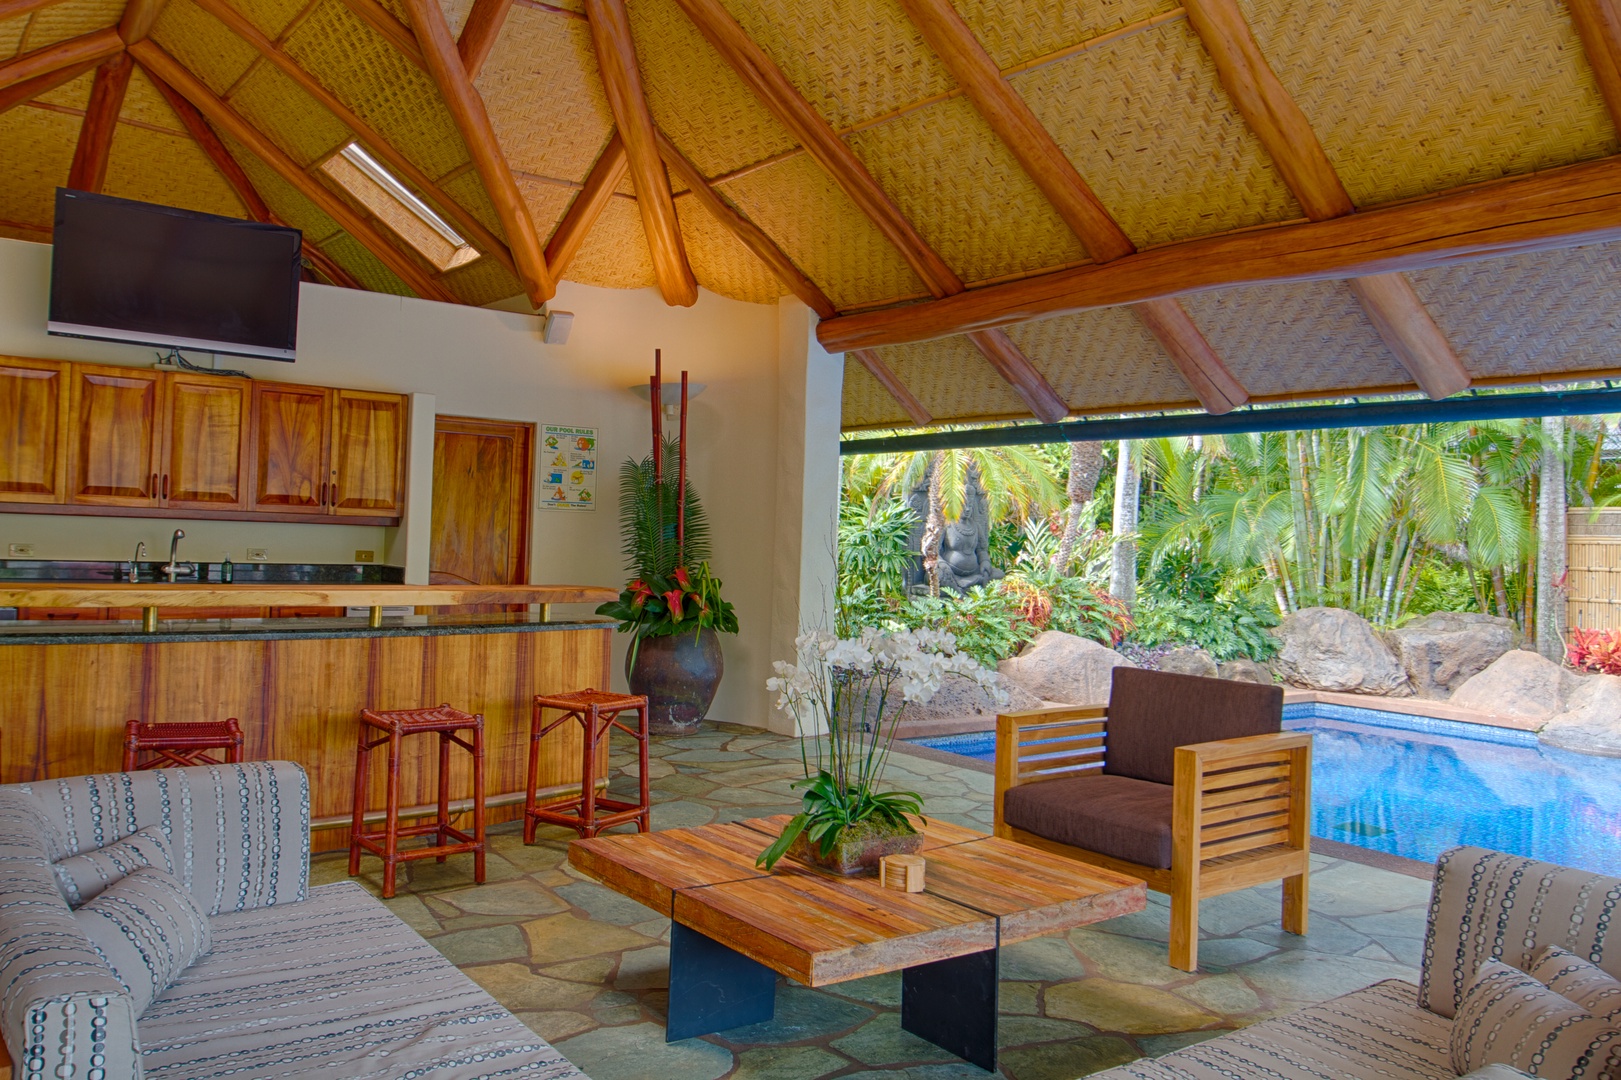 Kailua Vacation Rentals, Paul Mitchell Estate* - Pool House Bar with Big Screen TV and two full bathrooms